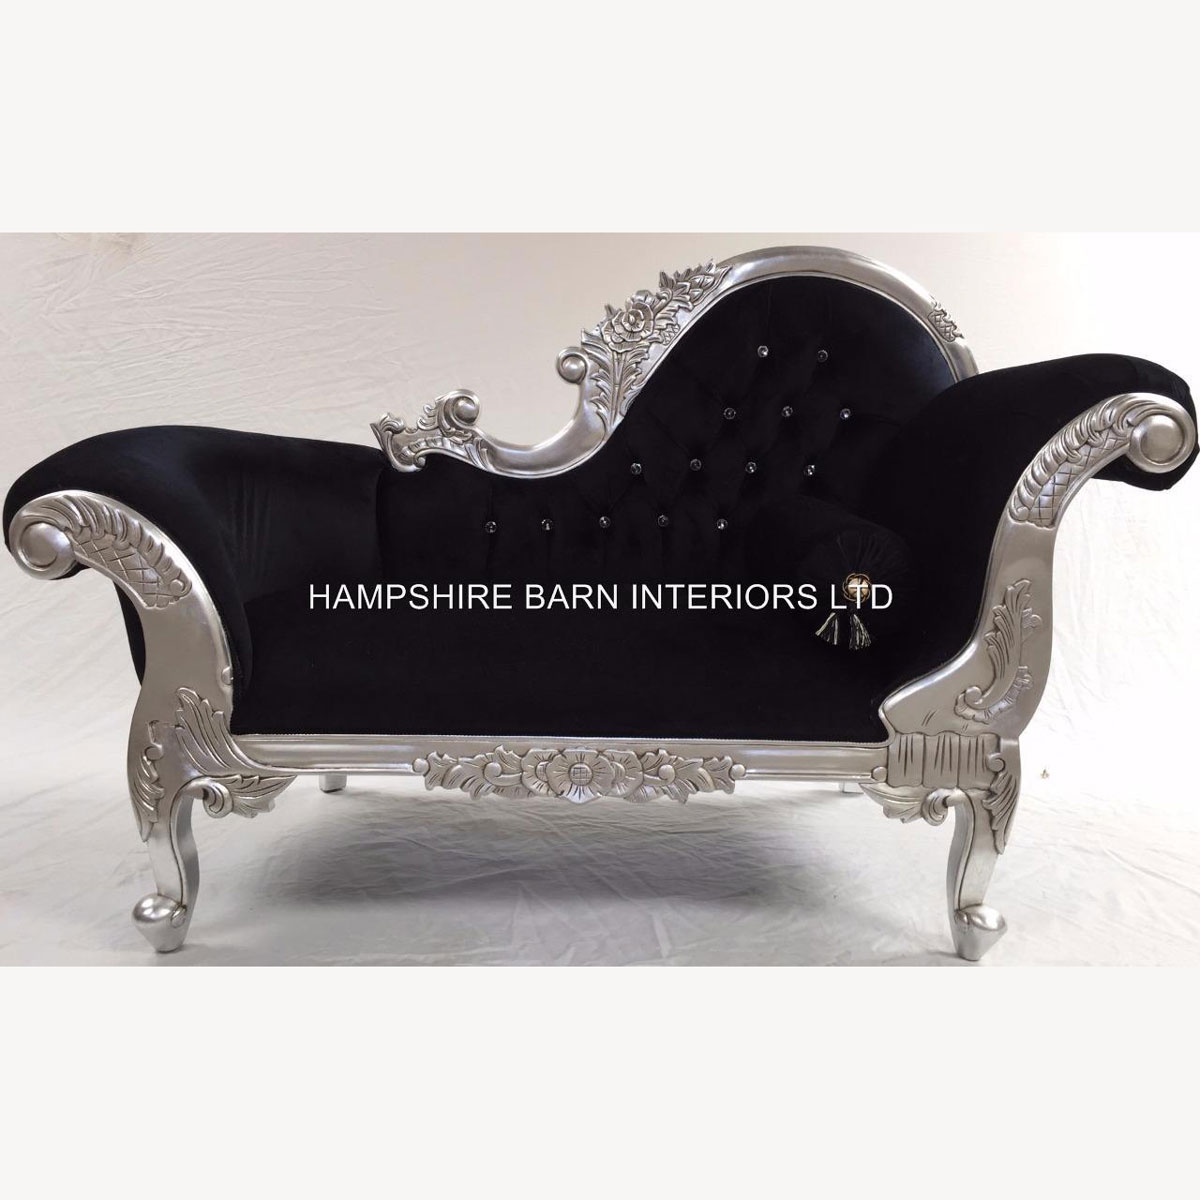 Beautiful New Addition To Our Small Chaise Longue Collection A Made To Order Smaller Sized Hampshire Chaise In Choice Of Frame Colours And Fabric Finishes 4 - Hampshire Barn Interiors - Made To Order Smaller Sized Hampshire Chaise In Choice Of Frame Colours And Fabric Finishes -